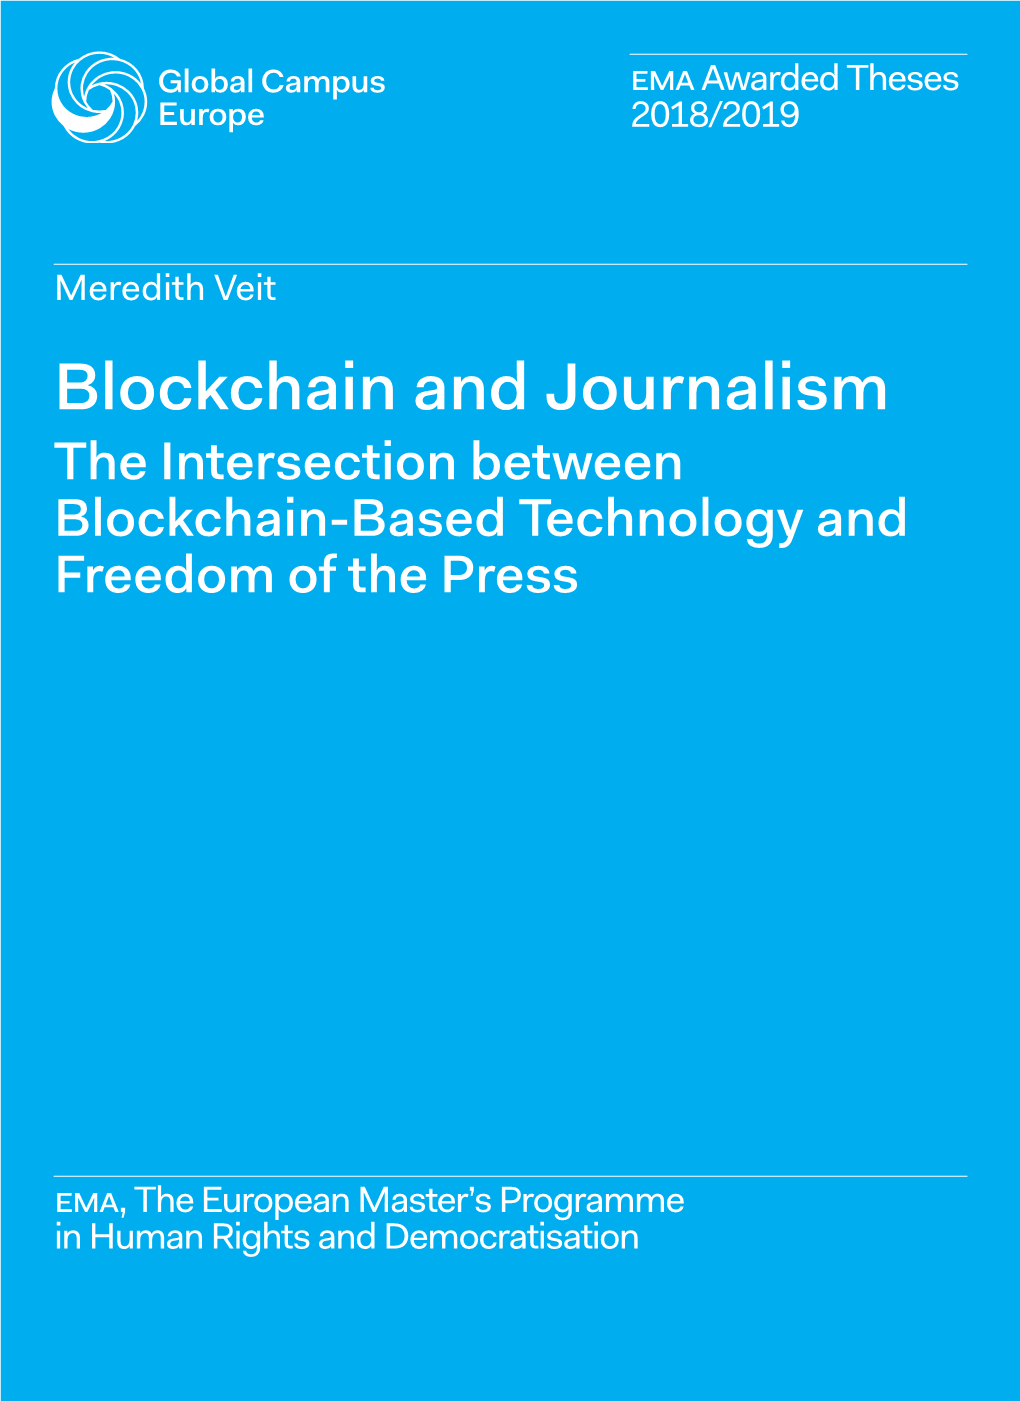 Blockchain and Journalism the Intersection Between Blockchain-Based Technology and Freedom of the Press